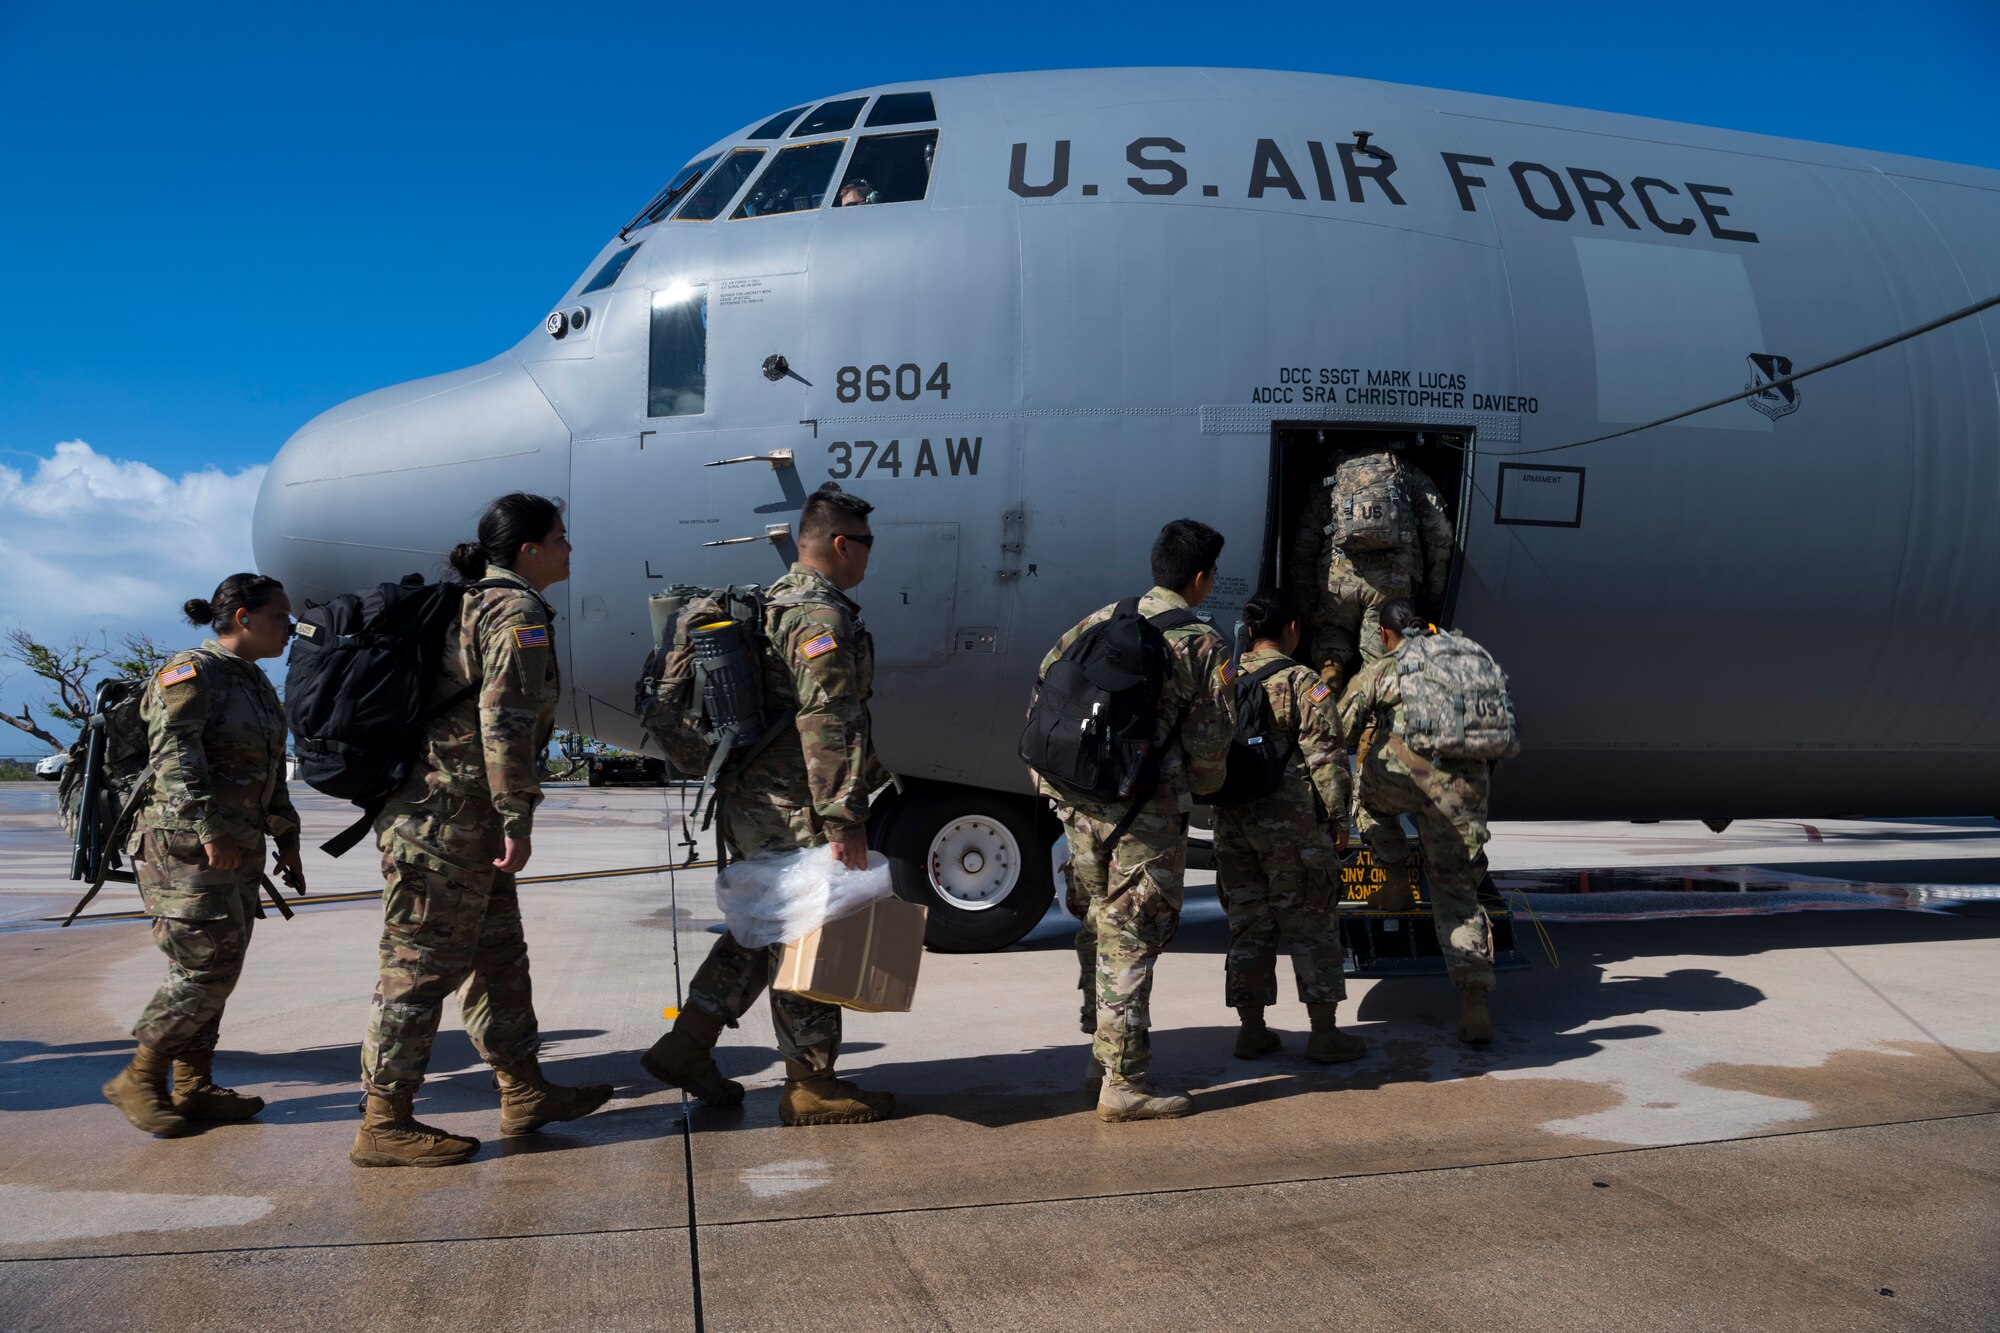 Guam Army National Guardsmen assigned to the 1224th Engineer Support Company walk onto a U.S. Air Force C-130J Super Hercules during redeployment operations Nov. 24, 2018, in Saipan, Commonwealth of the Northern Mariana Islands, after supporting the Super Typhoon Yutu relief effort.